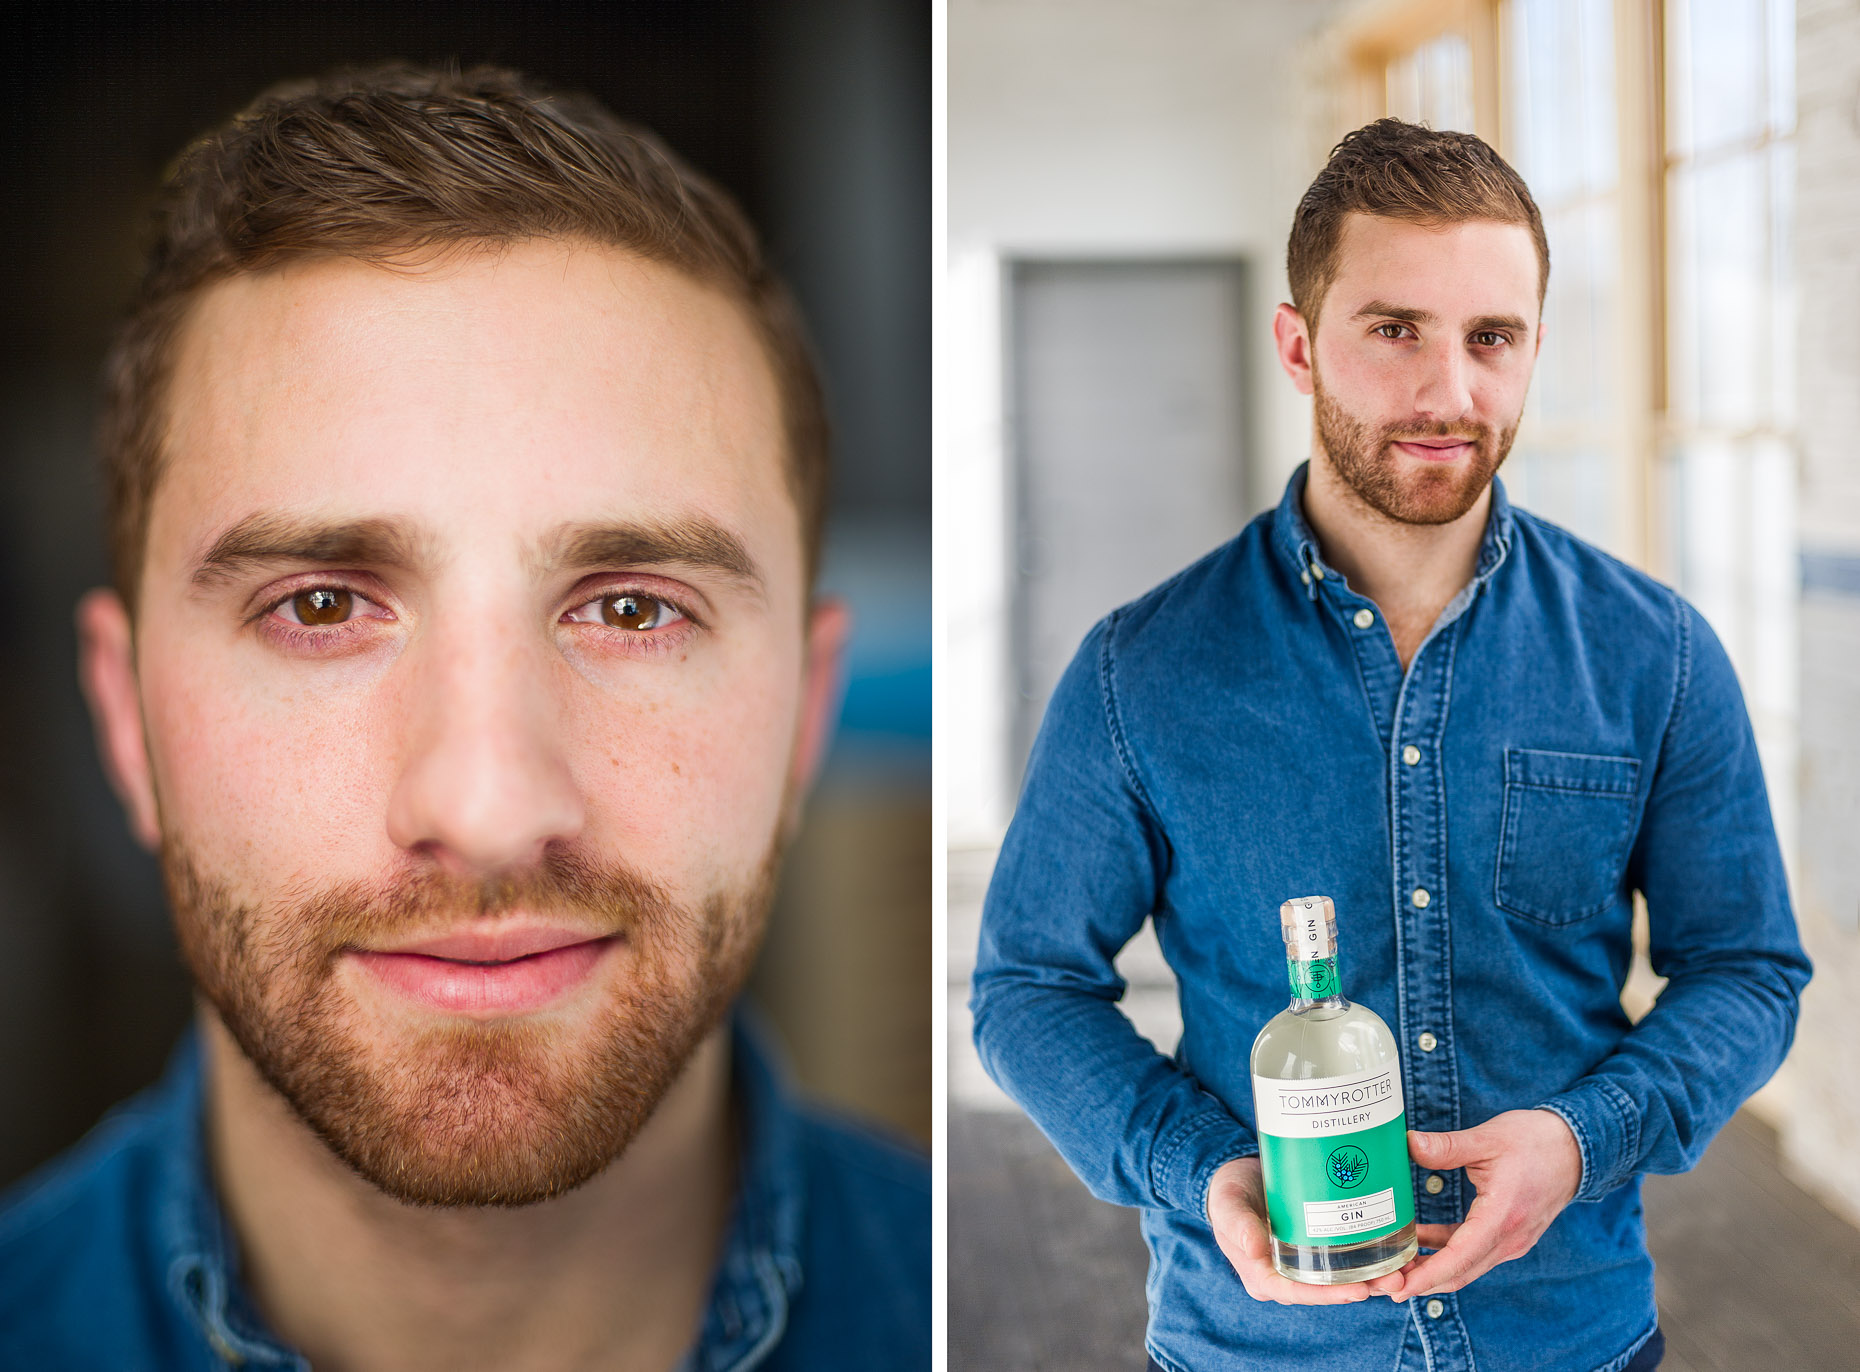 aaron-ingrao-keepers-of-the-craft-cocktails-across-america-tommyrotter-distillery-bobby-diptych-20160202-417-Edit